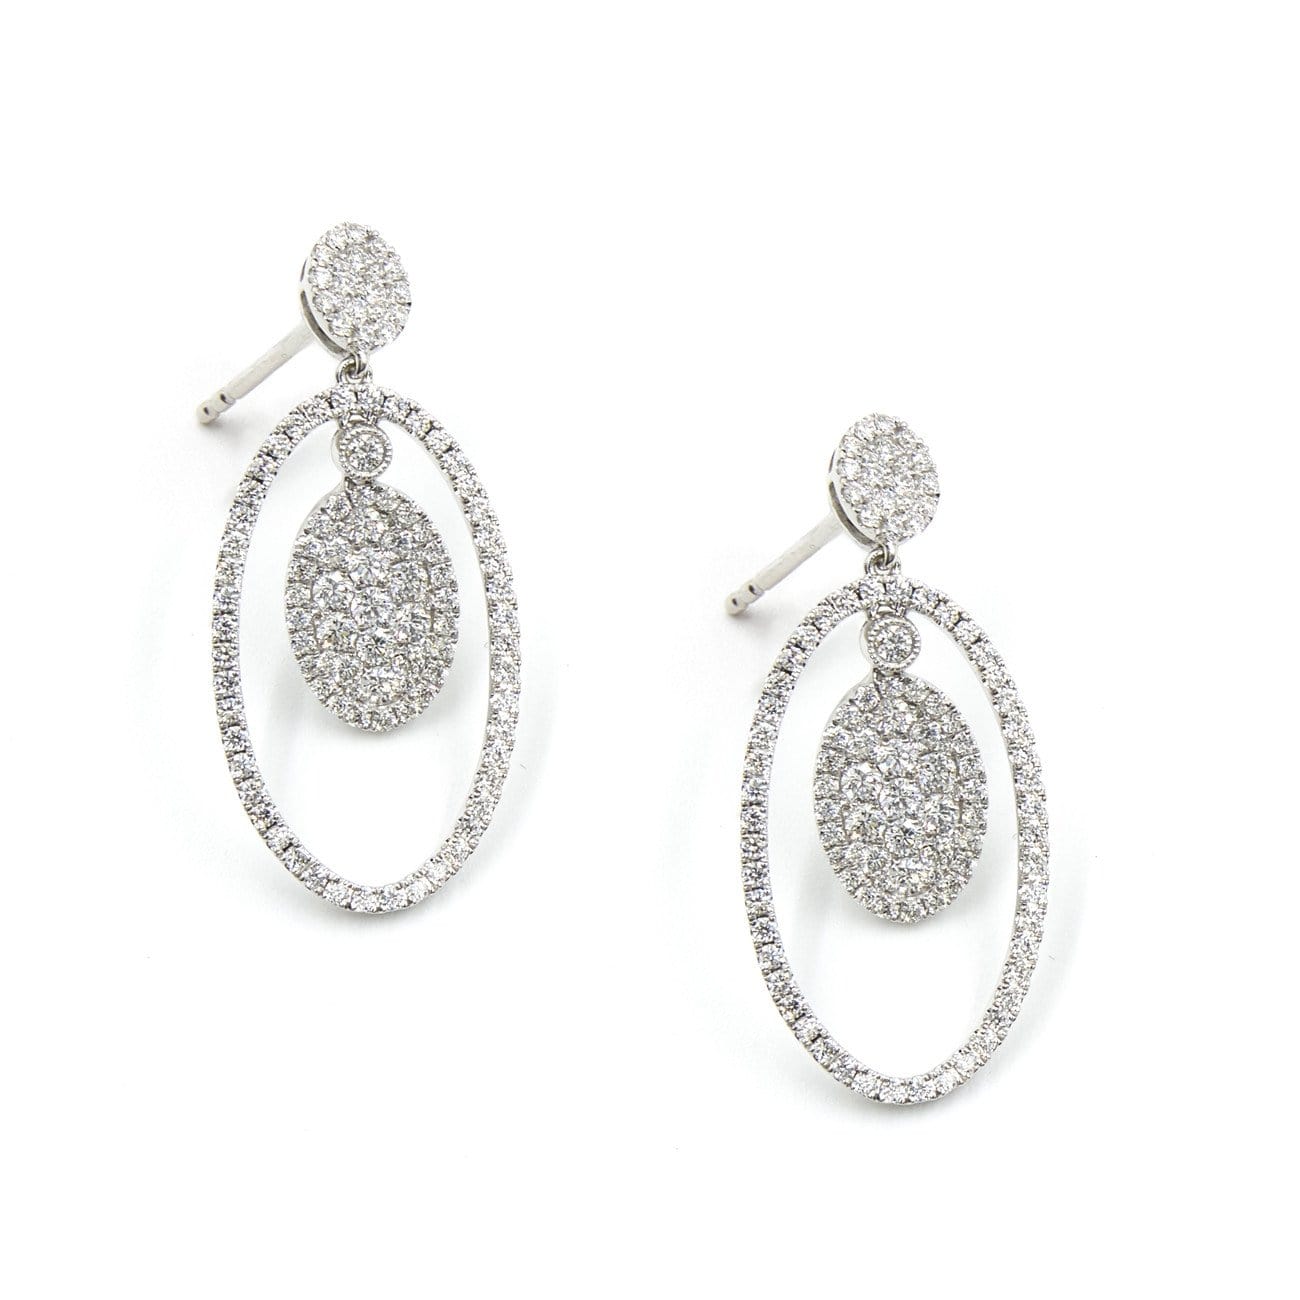 QUEEN DIANA-DIAMOND EARRINGS - Chris Aire Fine Jewelry & Timepieces